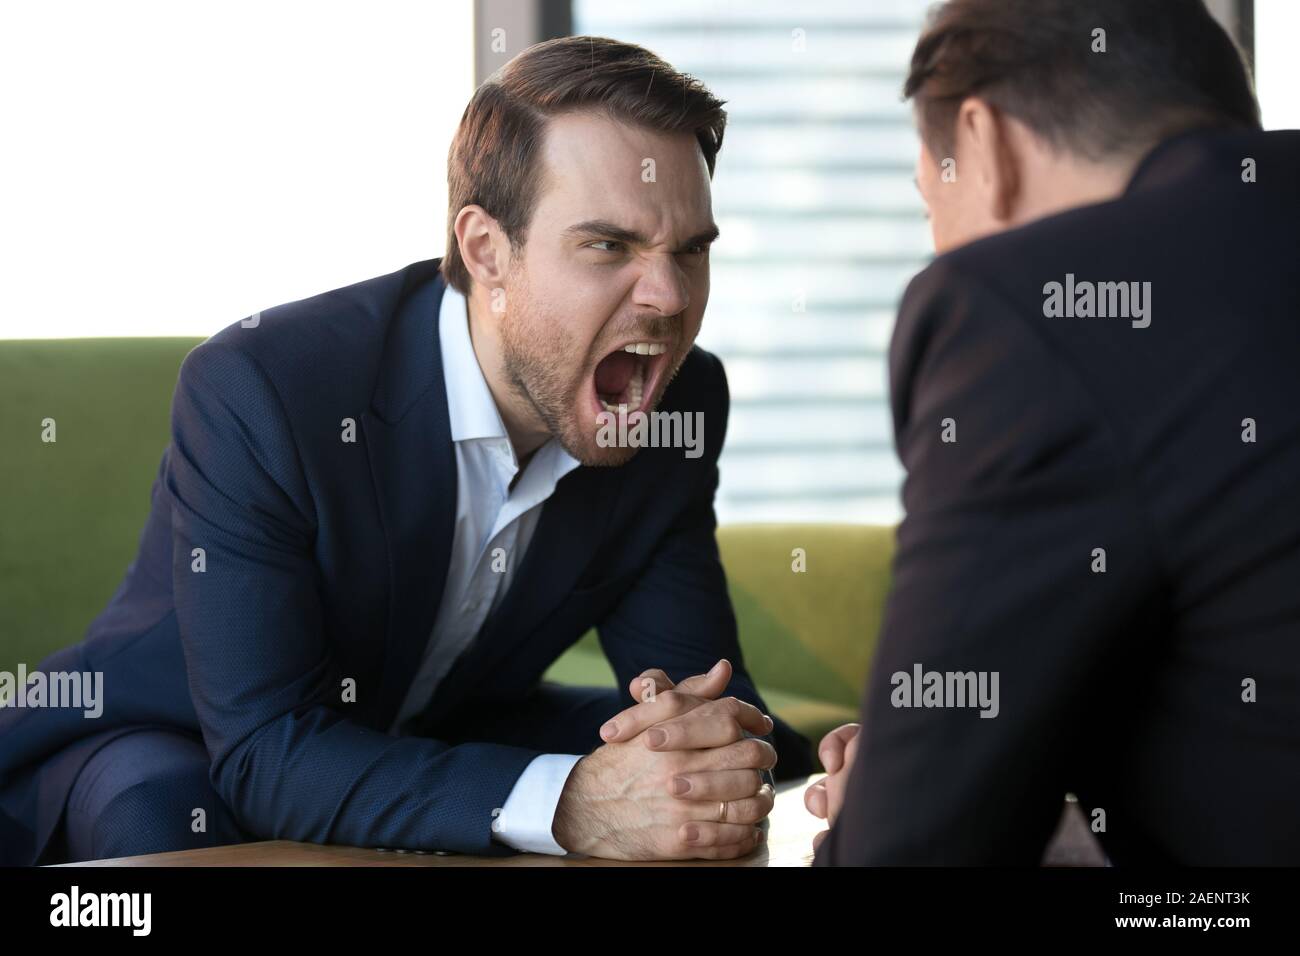 Angry businesswoman screaming at opponent, showing aggression at meeting Stock Photo